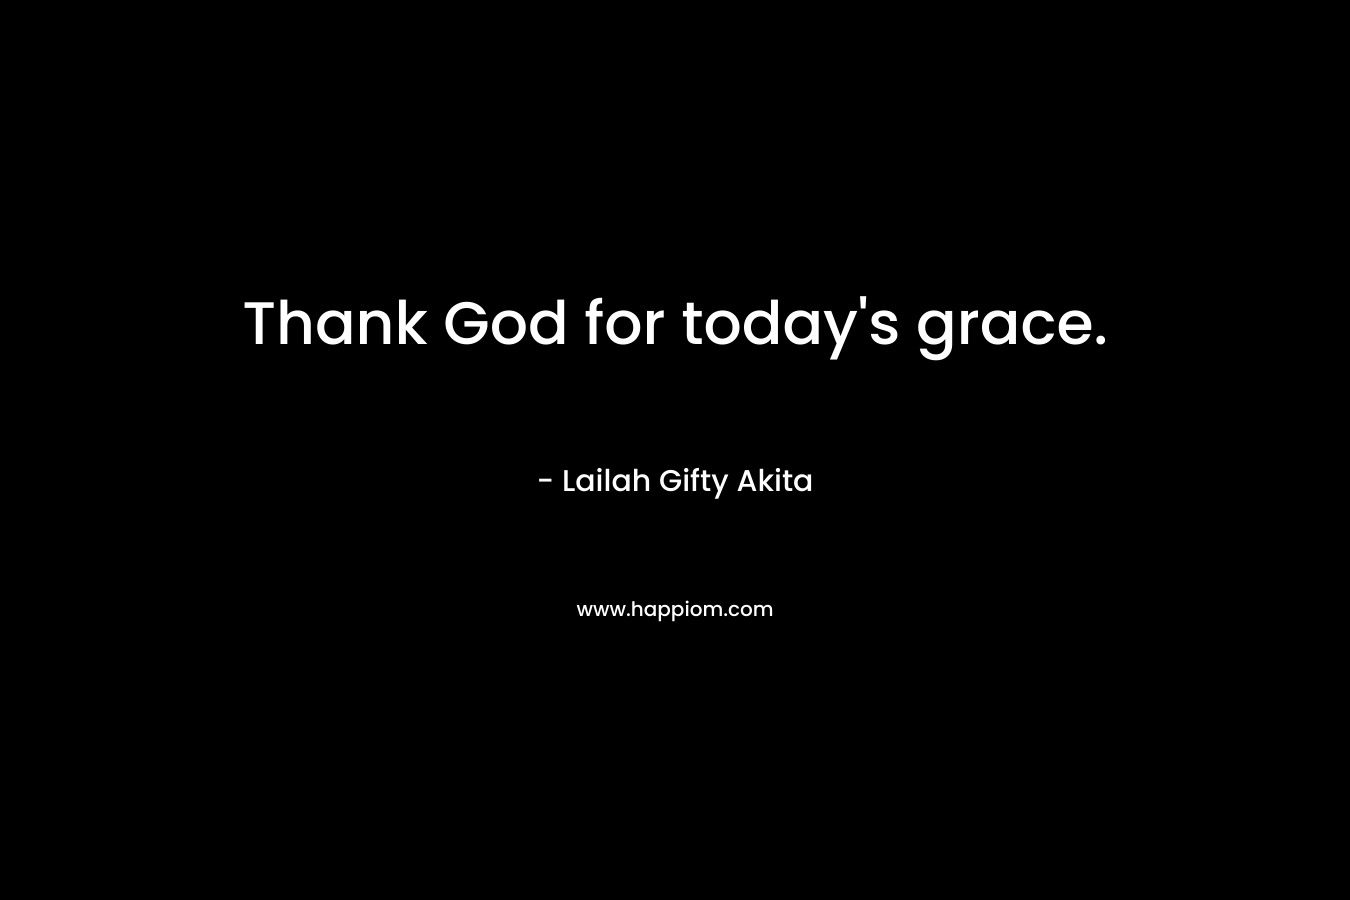 Thank God for today's grace.